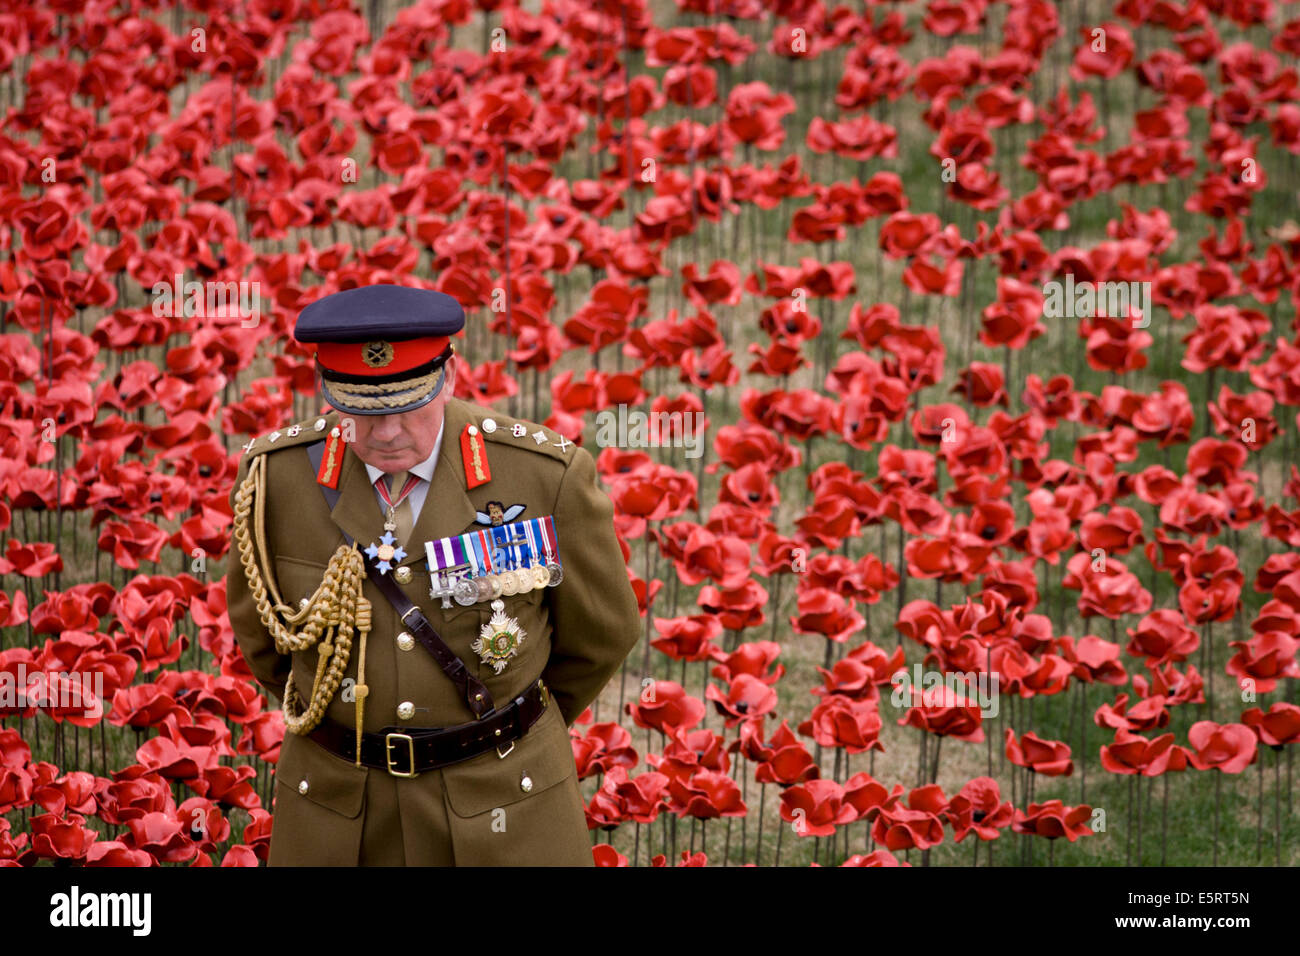 London, UK 5th August 2014: Marking the centenary of the beginning of the First World War (WW1) in 1914, General the Lord Dannatt stands among some of the ceramic poppies created by artist Paul Cummins.  Remaining in place until the date of the armistice on November 11th. Across the world, remembrance ceremonies for this historic conflict that affected world nations. General Francis Richard Dannatt, Baron Dannatt, GCB, CBE, MC, DL (born 1950) is a retired British Army officer and the incumbent Constable of the Tower of London. Credit:  Richard Baker / Alamy Live News. Stock Photo